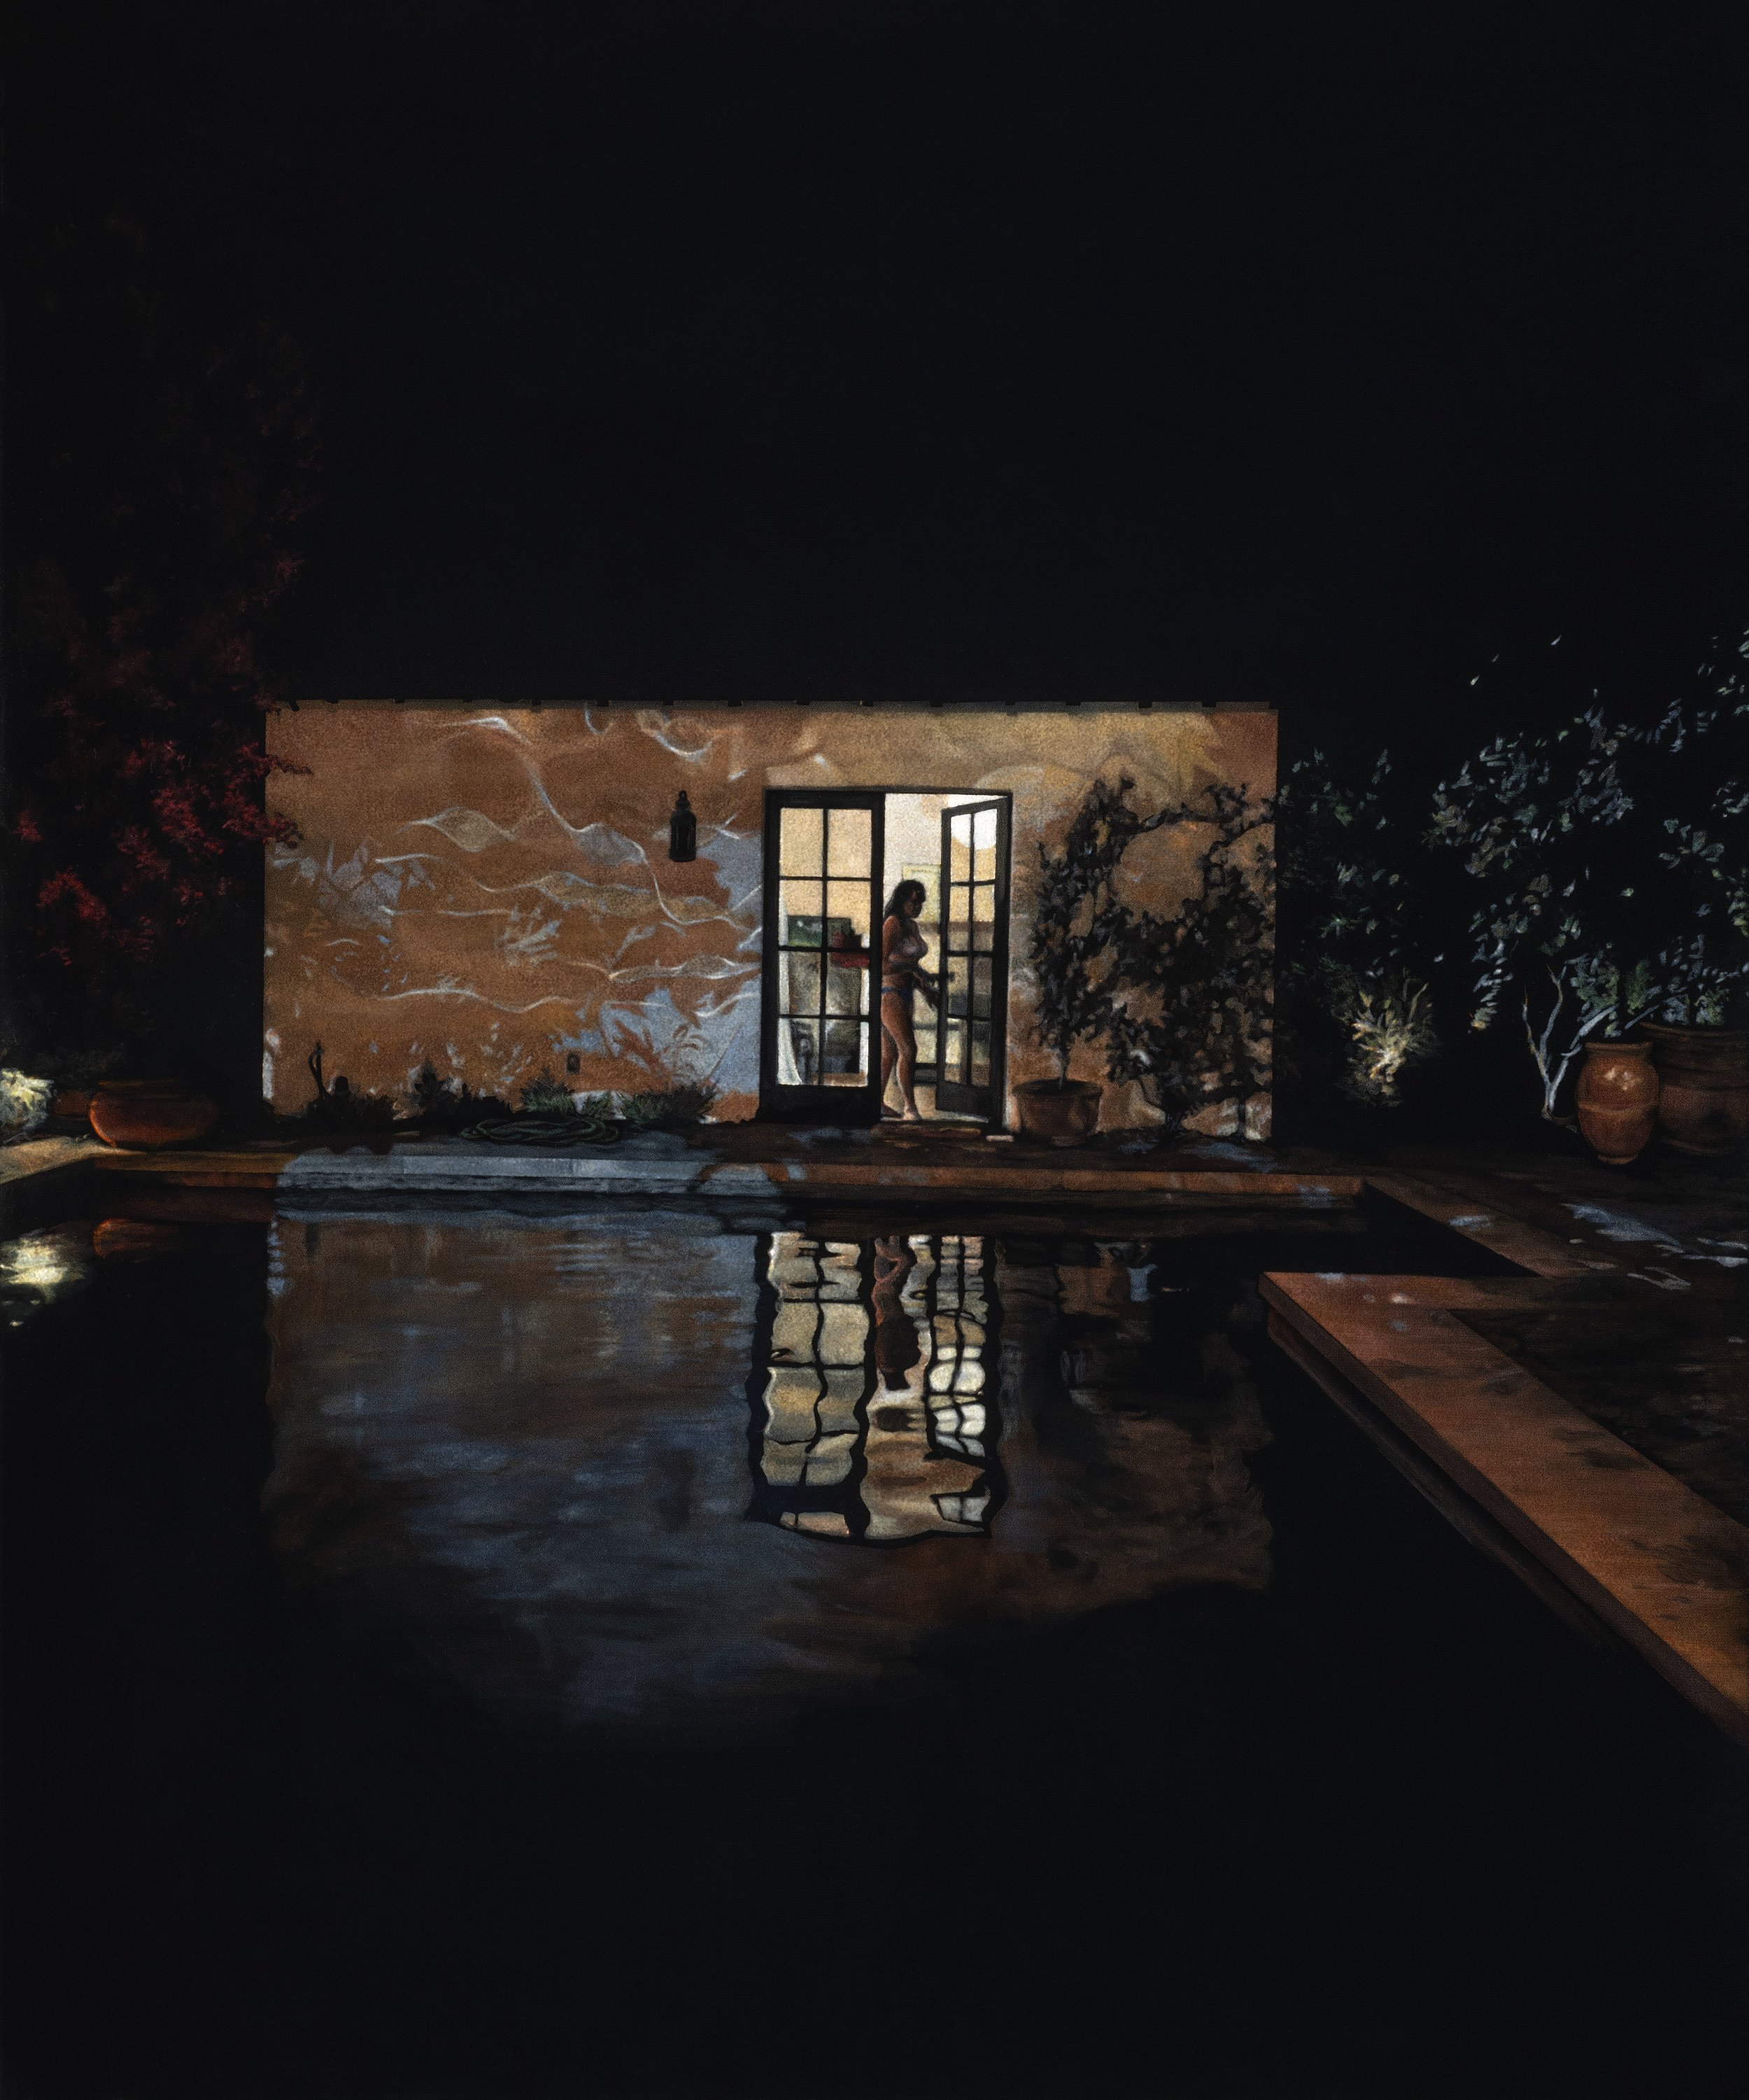  Guest House  acrylic on velvet  48 x 40 inches 